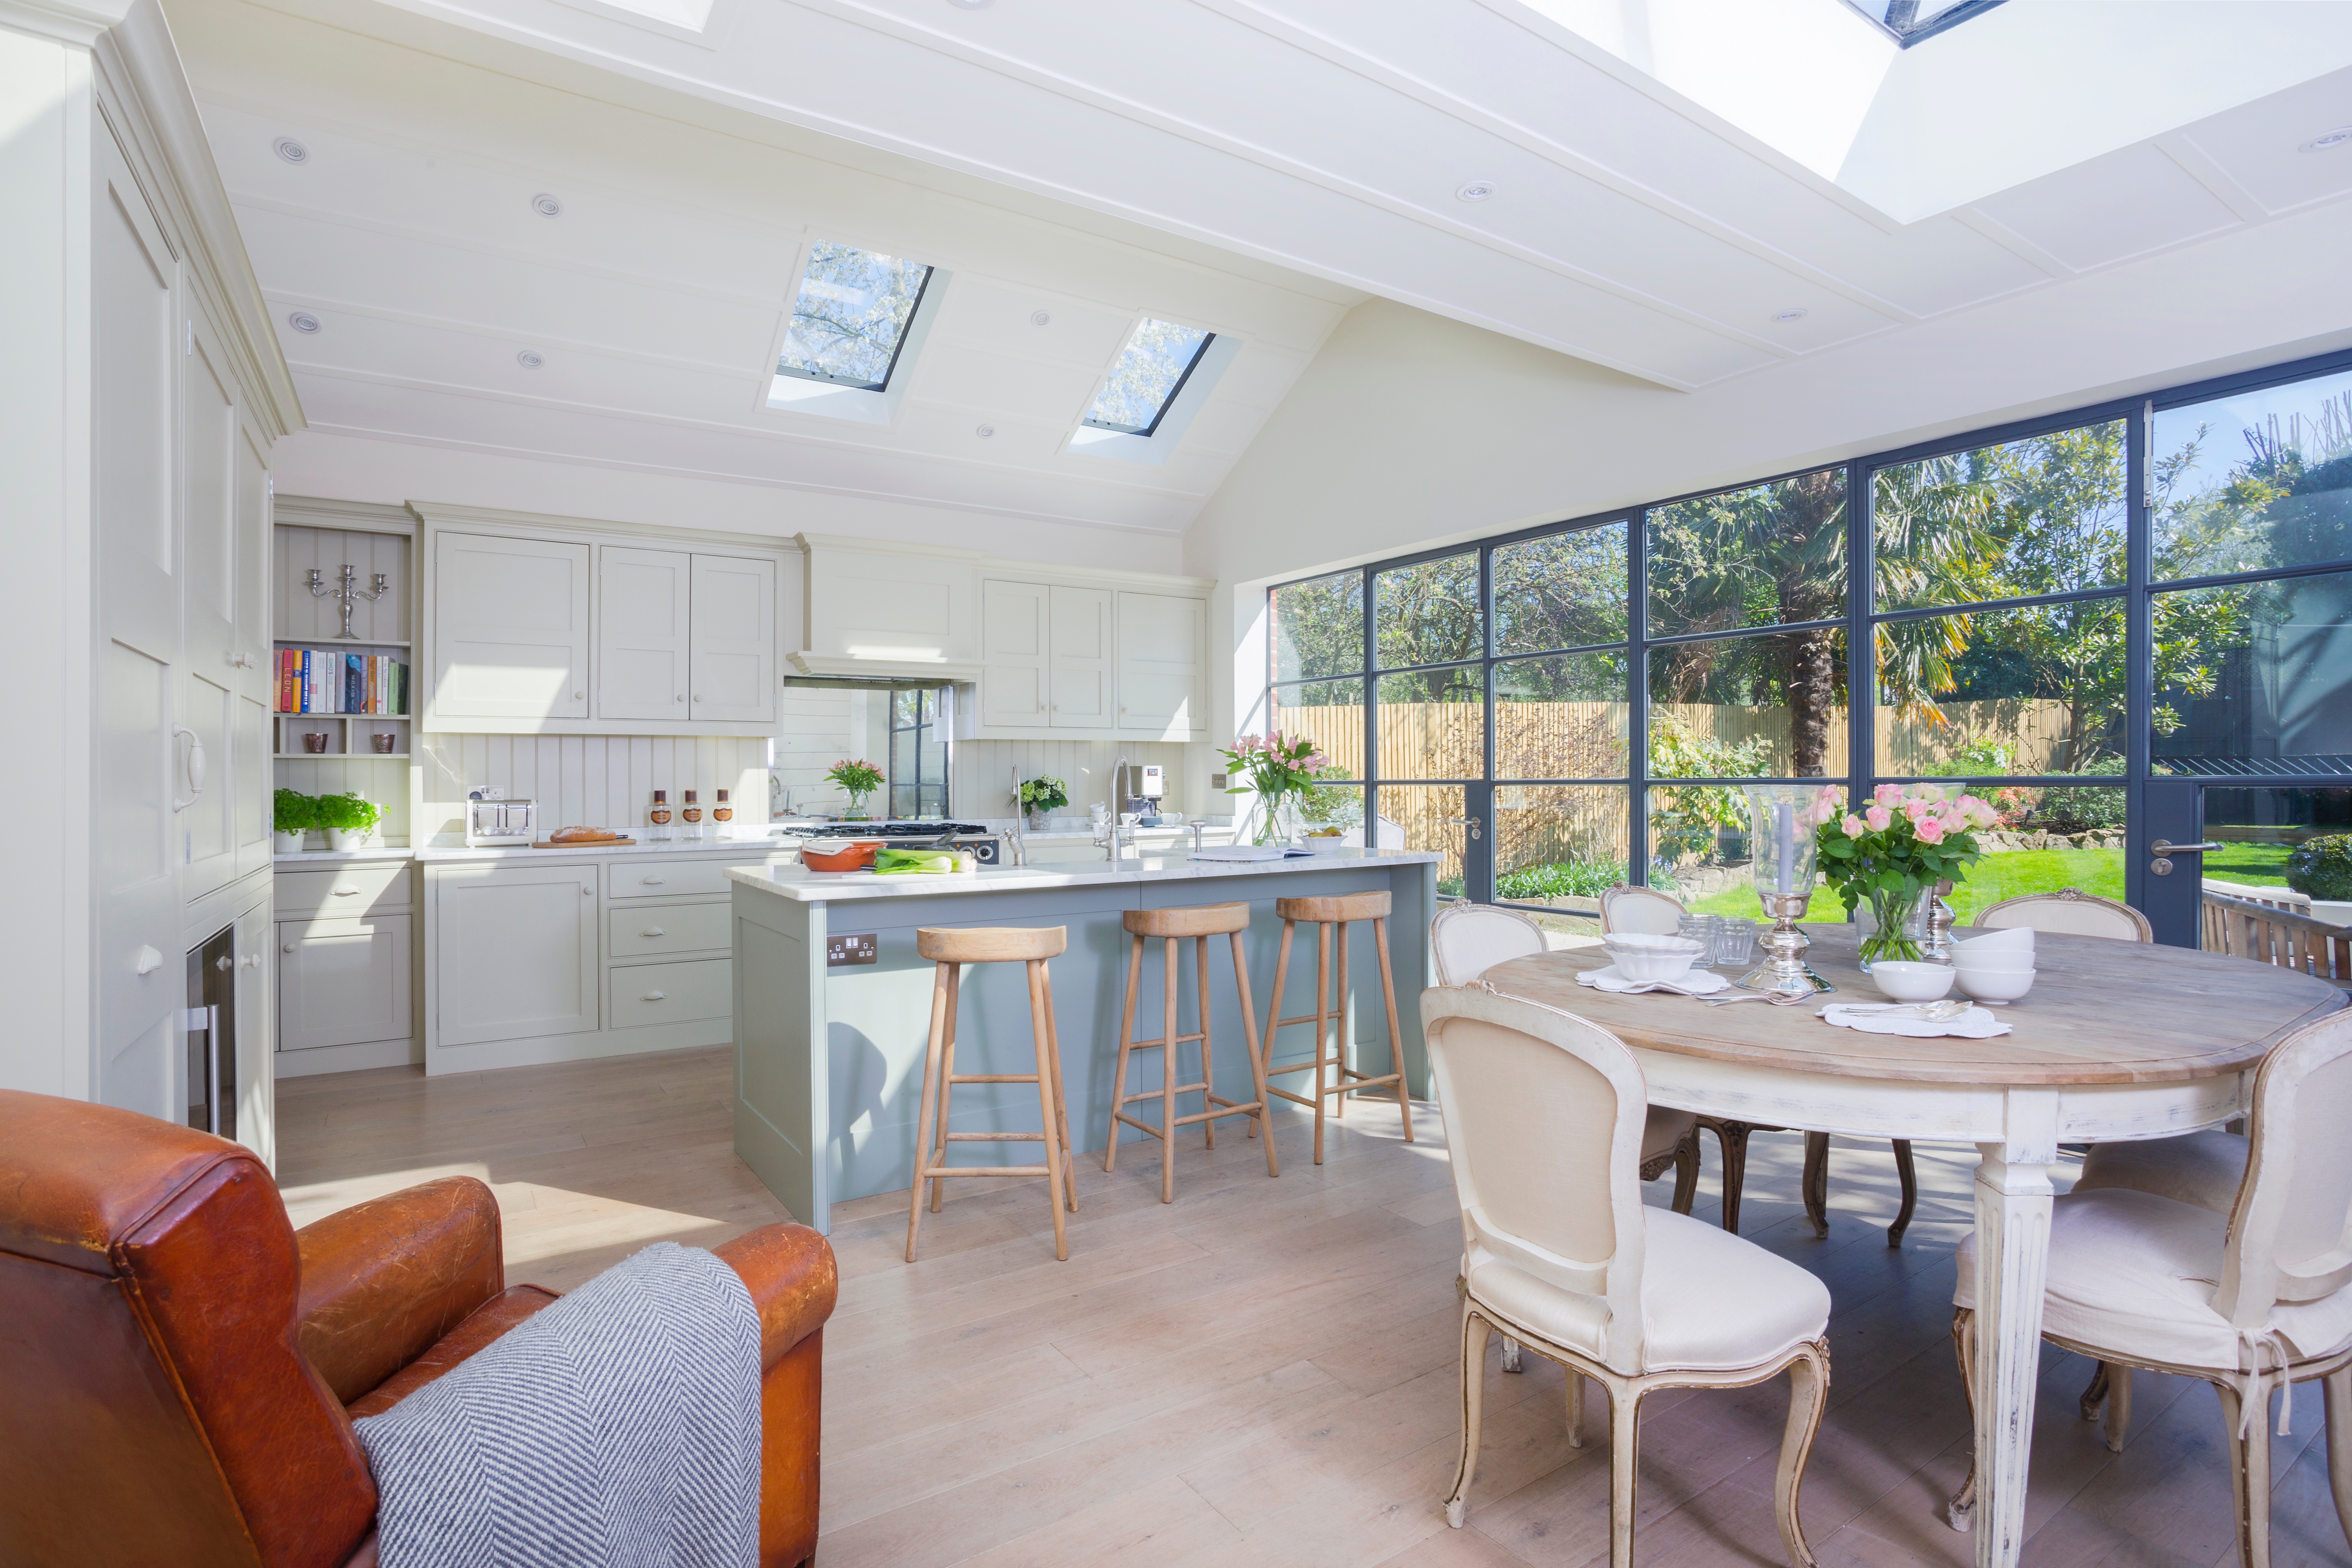 Open bespoke kitchen with island and open shelves with carrara worktops throughout and glass doors to garden.